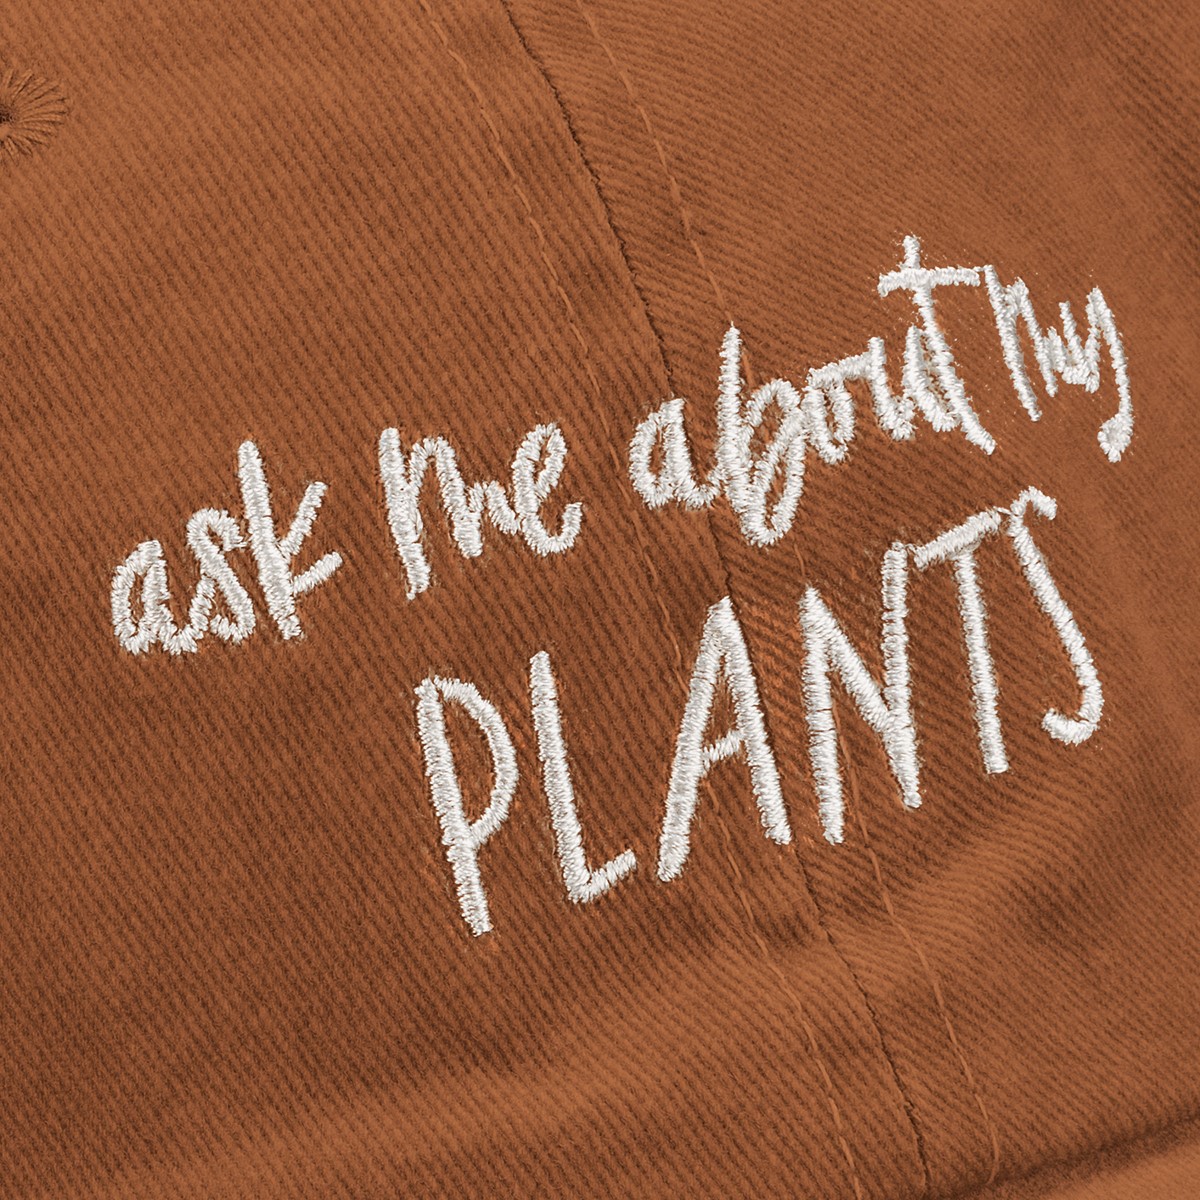 Baseball Cap - Ask Me About My Plants - One Size Fits Most - Cotton, Metal